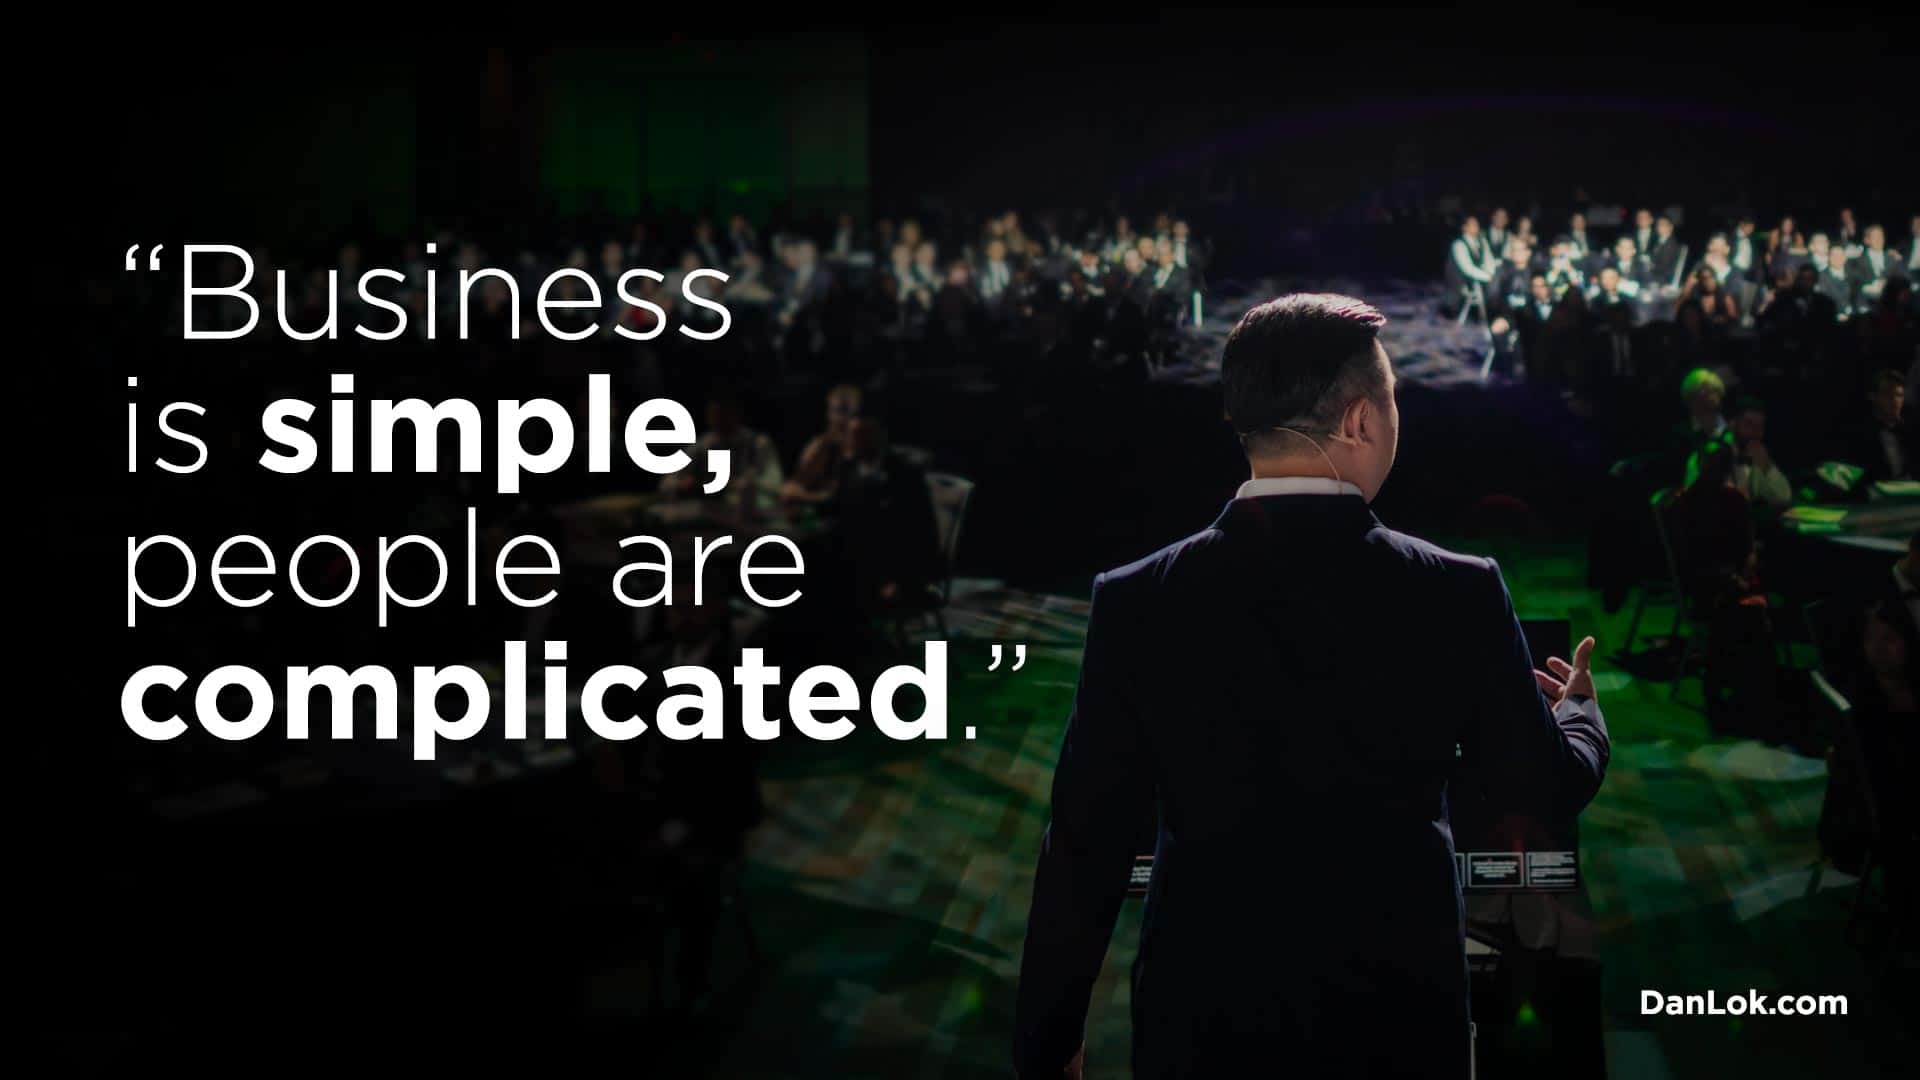 “Business is simple, people are complicated.”